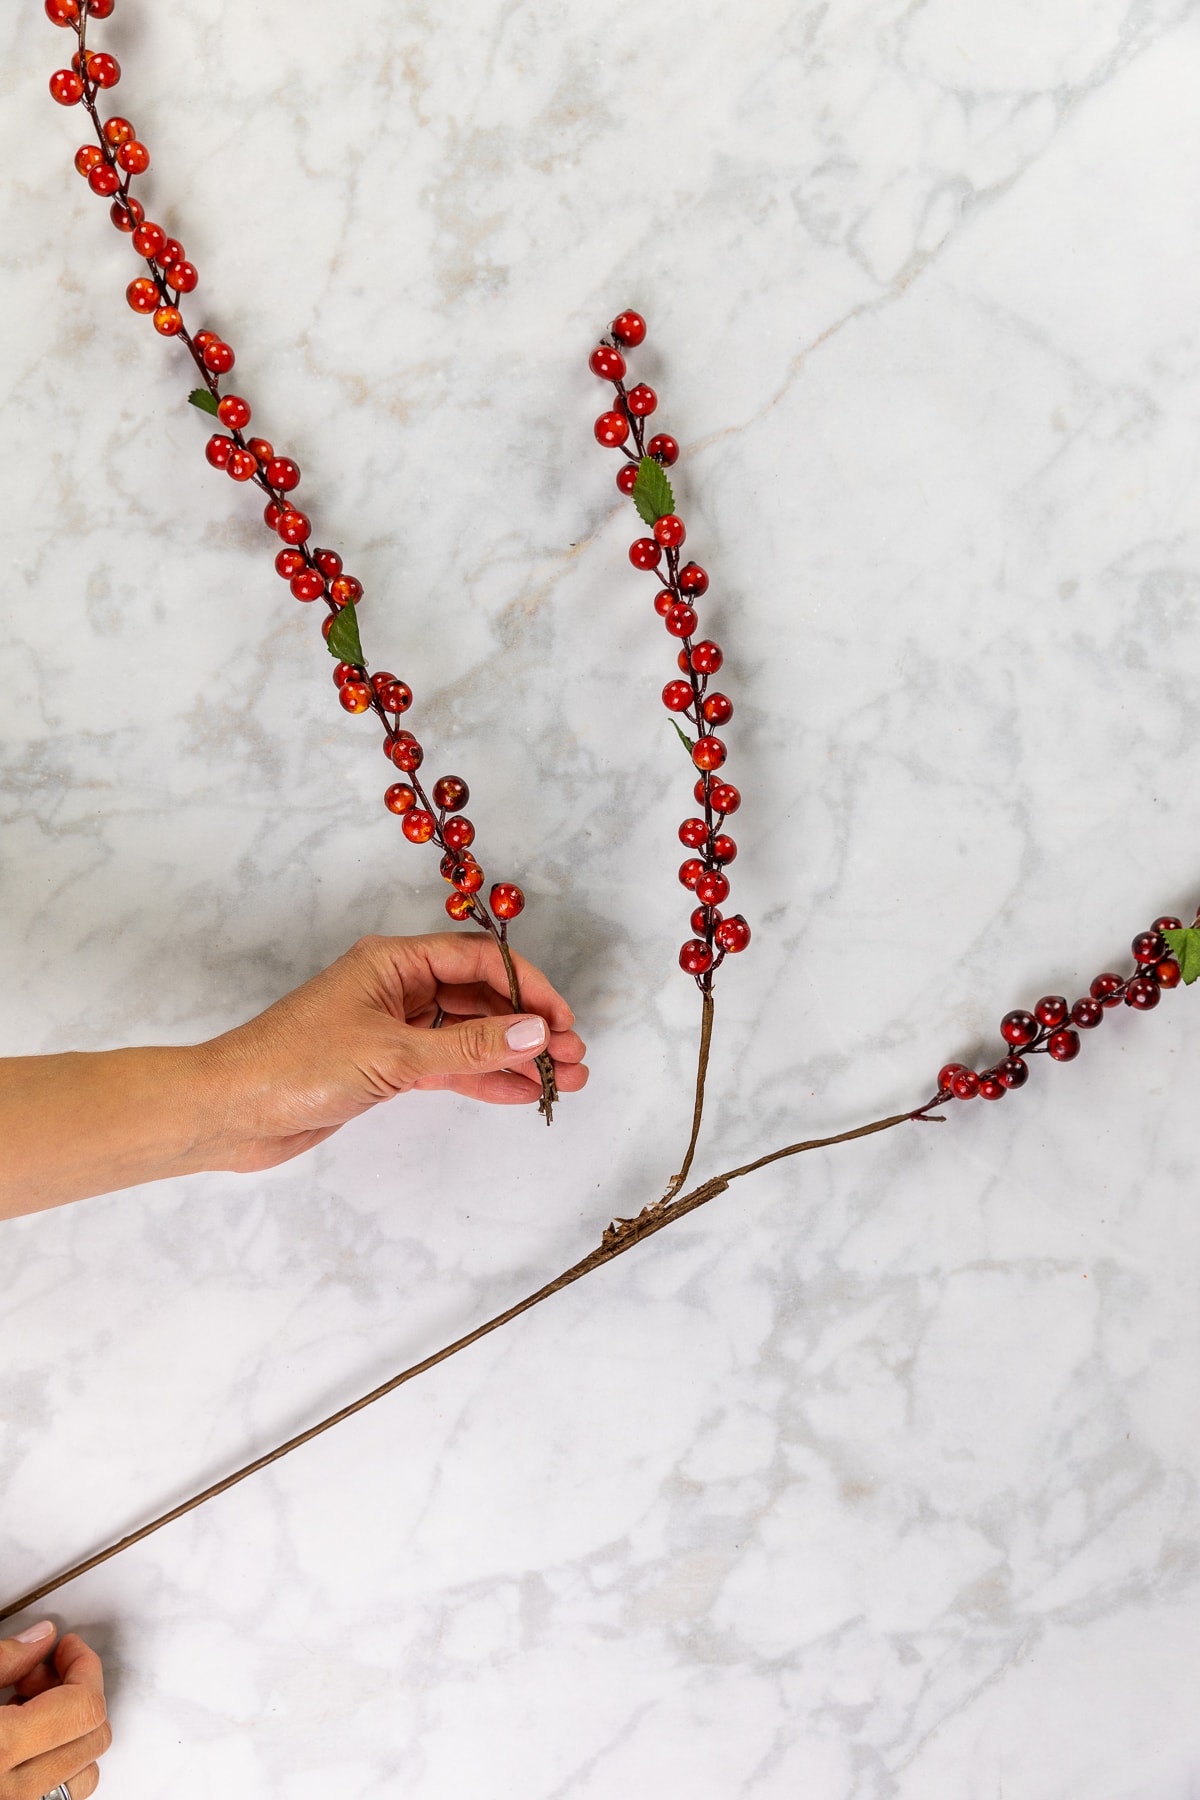 Separating berry stems into individual branches to use for DIY table centerpiece.